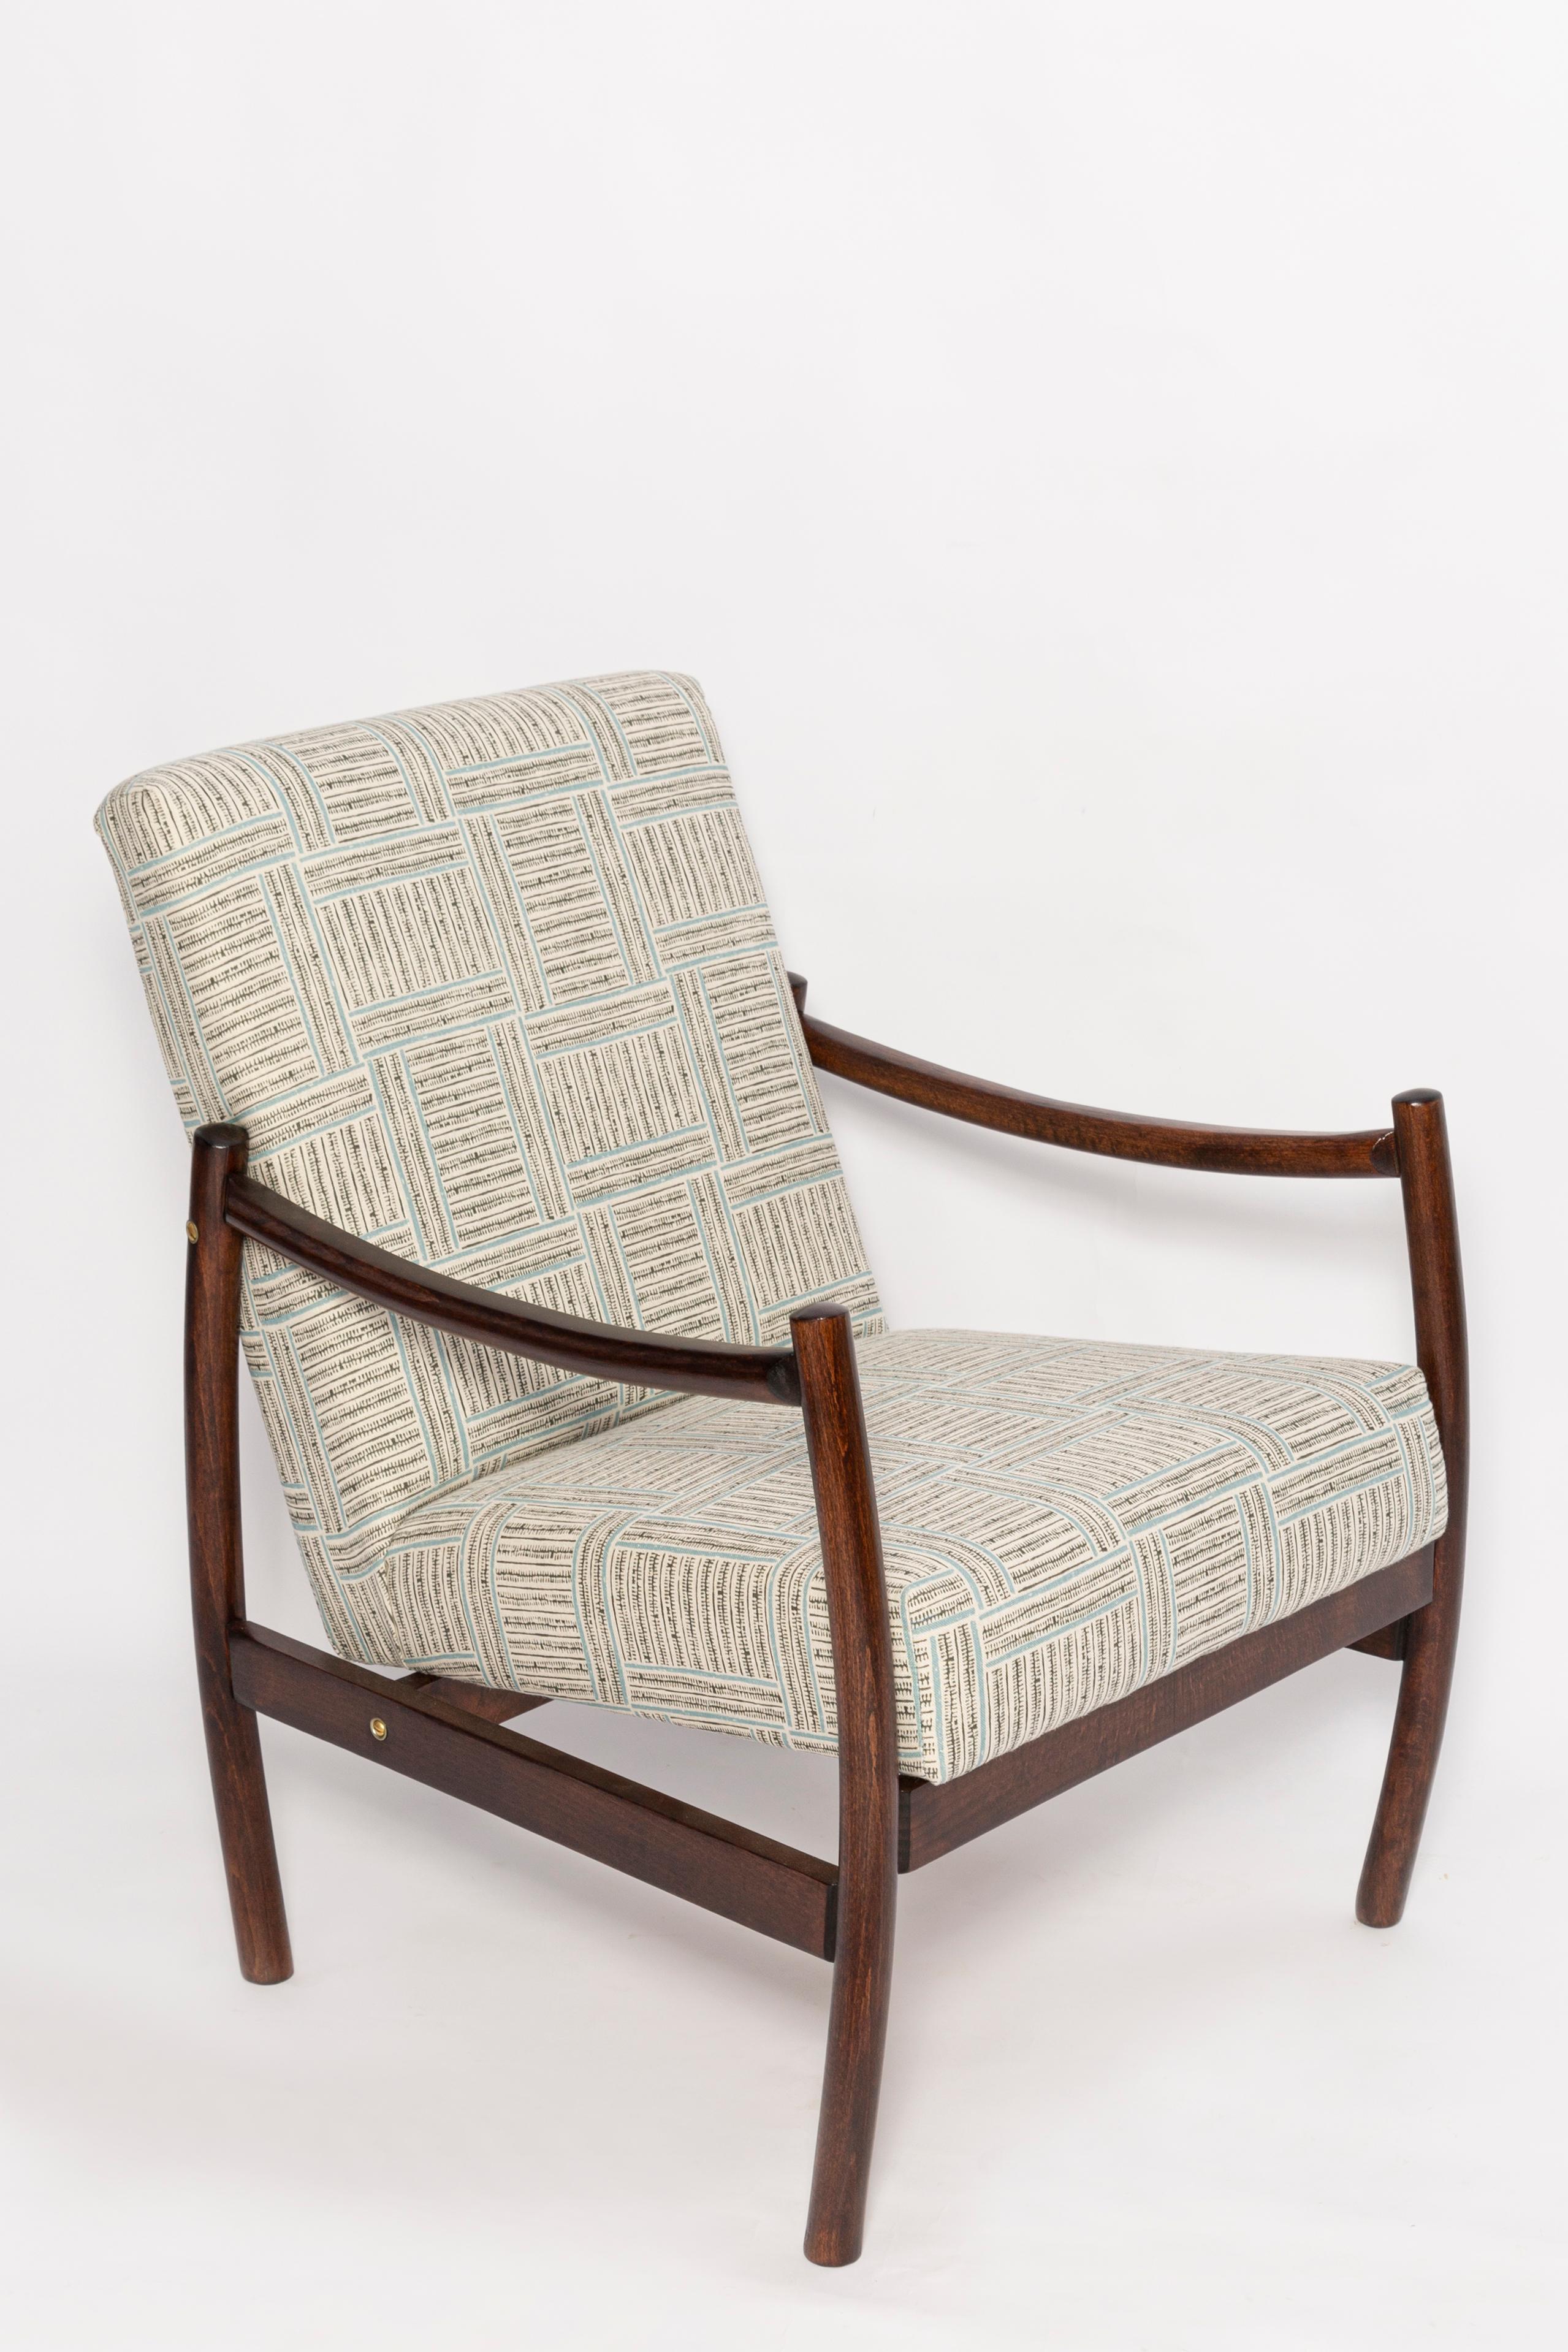 Mid-Century Modern Mid-20th Century Vintage Armchair, Beige and Blue Linen, Europe, 1960s For Sale